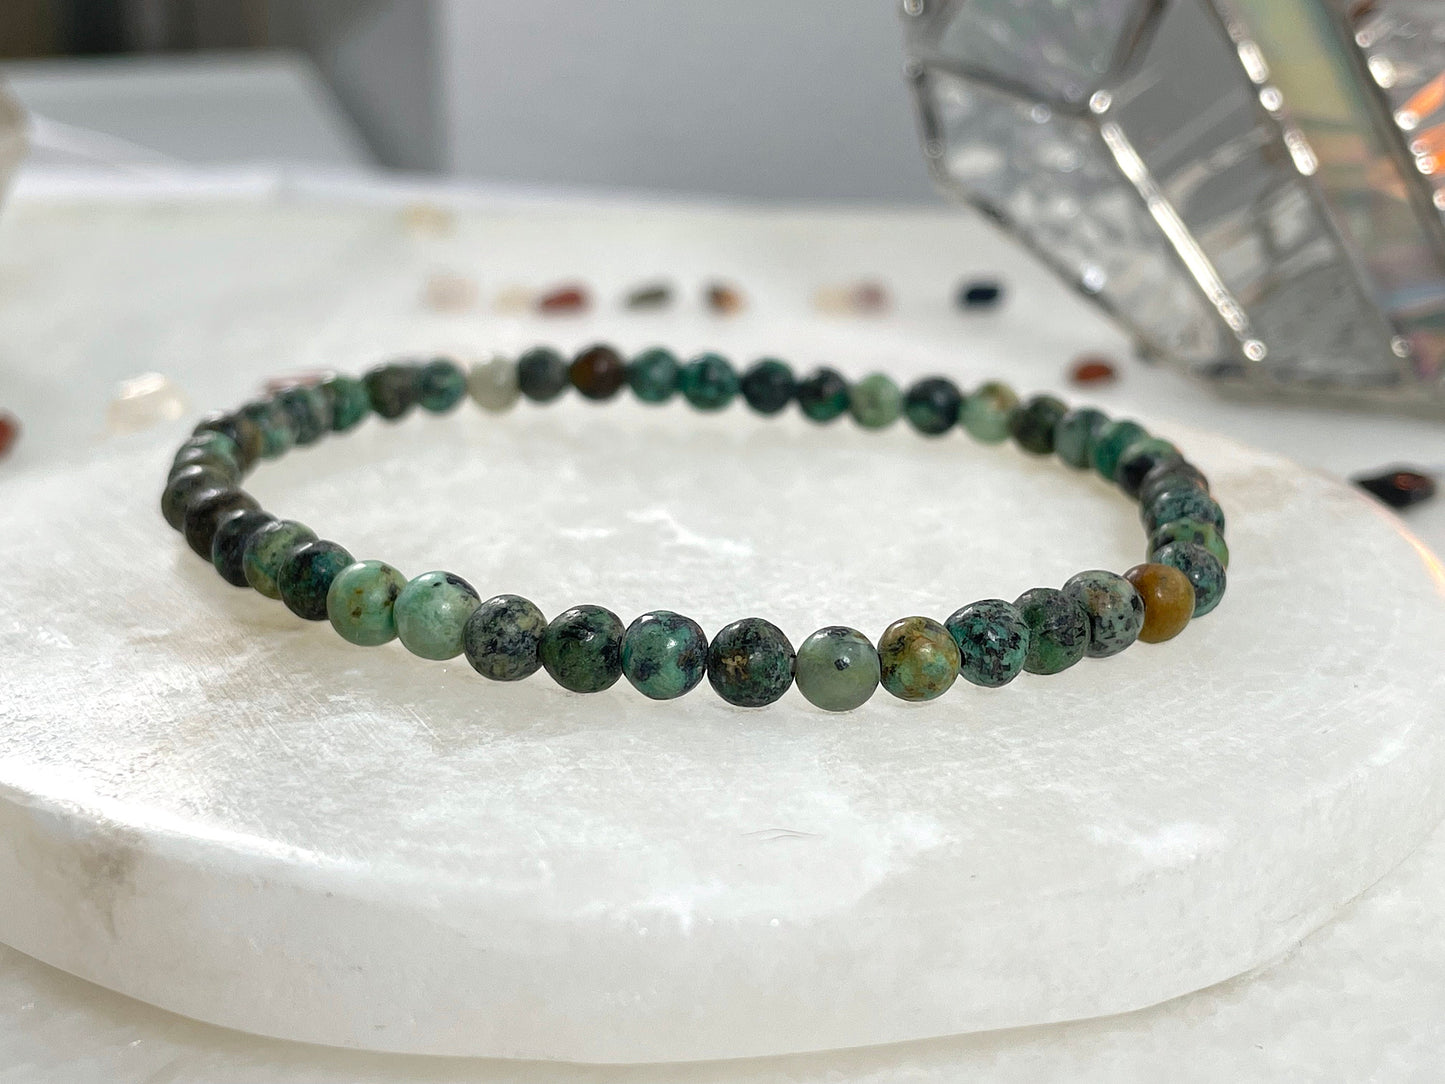 4mm Gemstone Beads Bracelet in African Turquoise: Protection Purification & Transformation